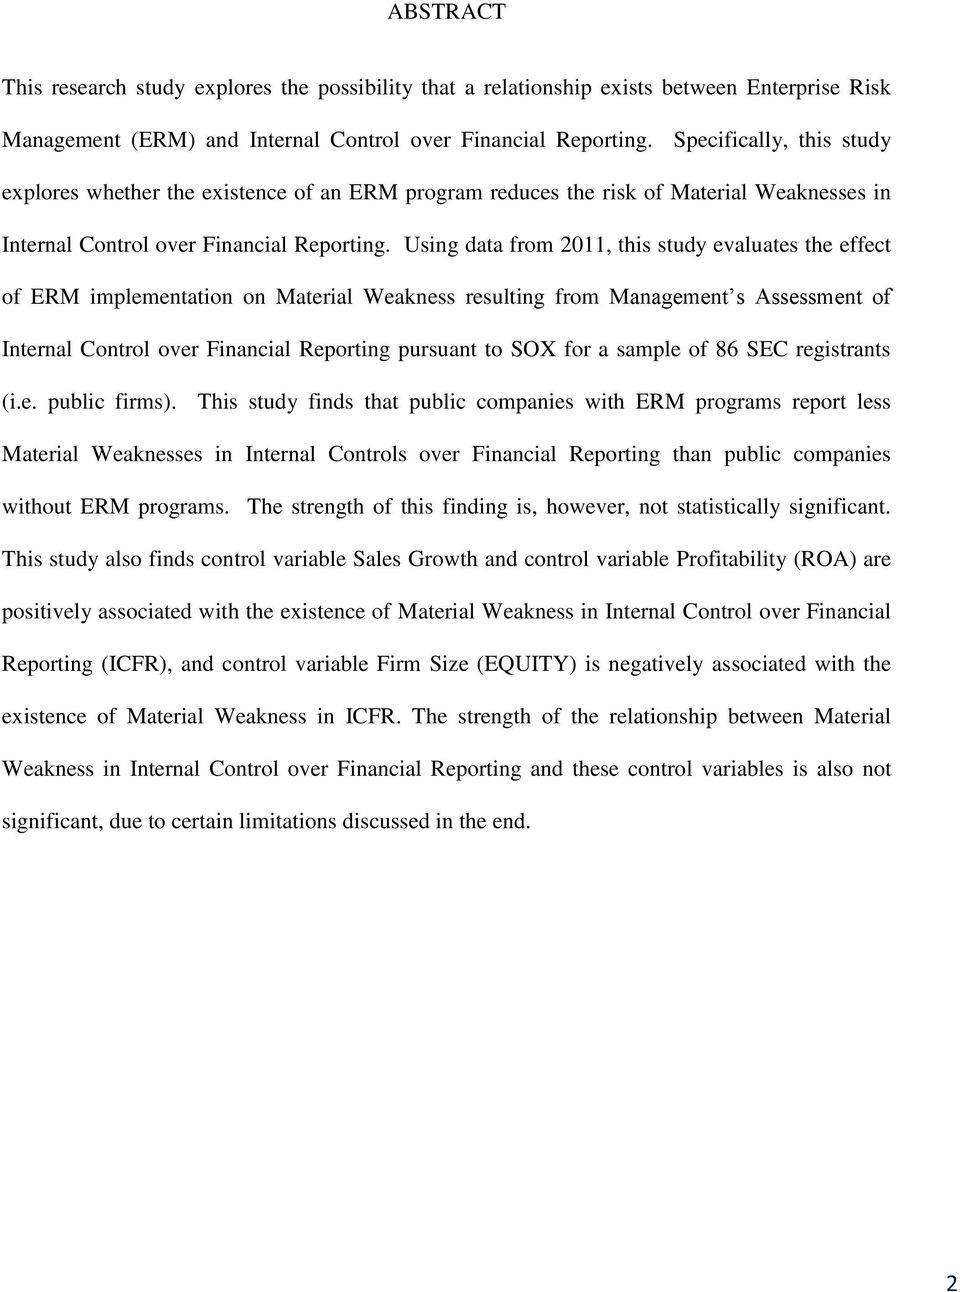 Using data from 2011, this study evaluates the effect of ERM implementation on Material Weakness resulting from Management s Assessment of Internal Control over Financial Reporting pursuant to SOX